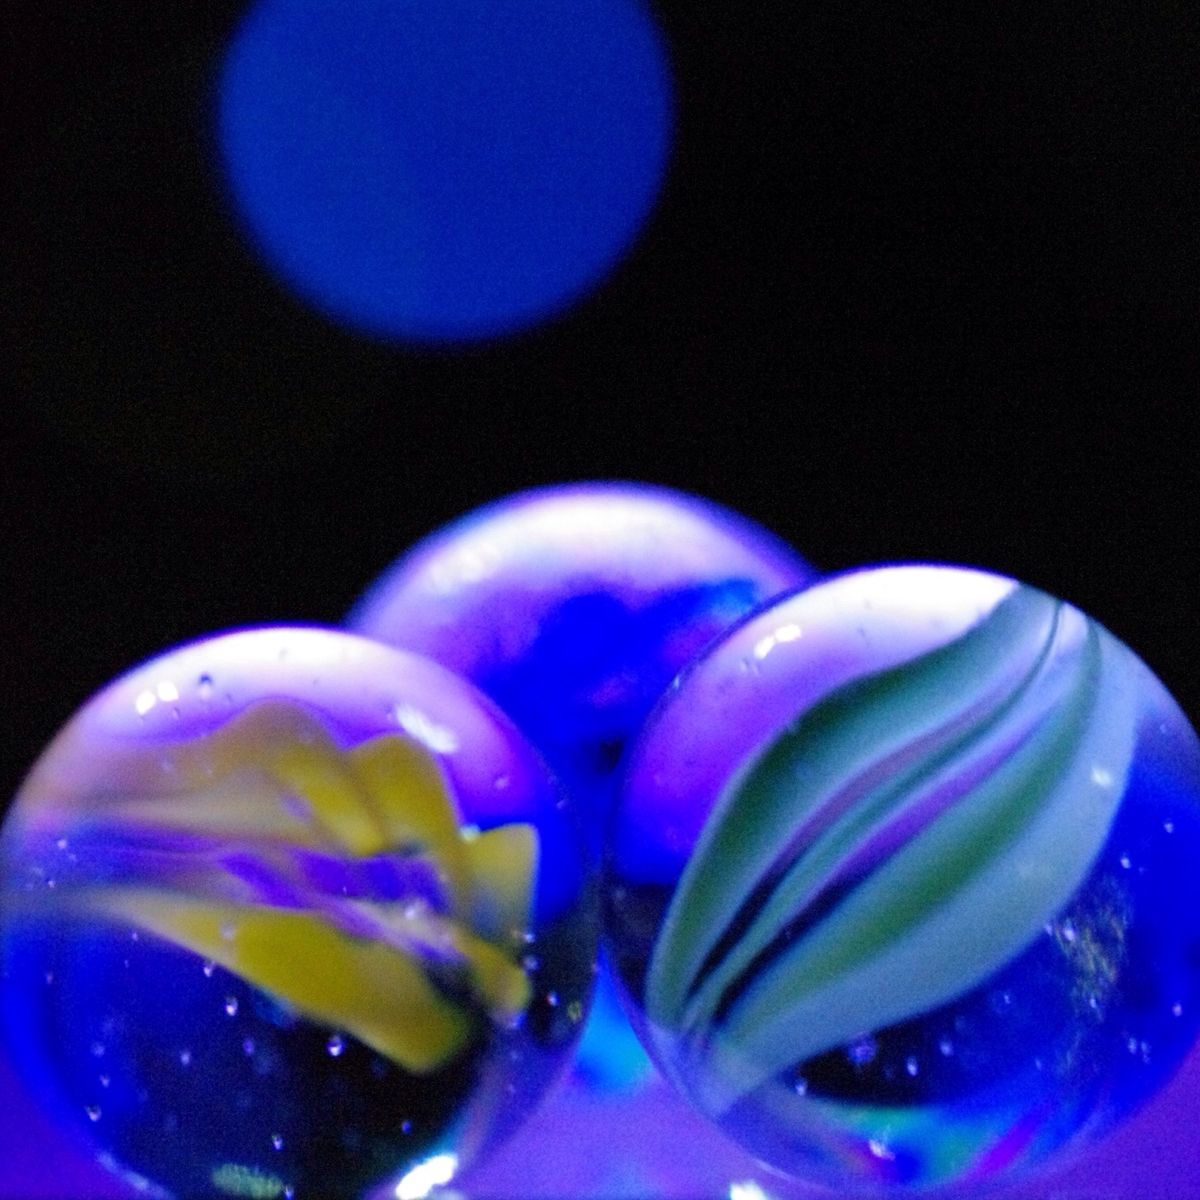 close up of marbles with reflection on glass against black background